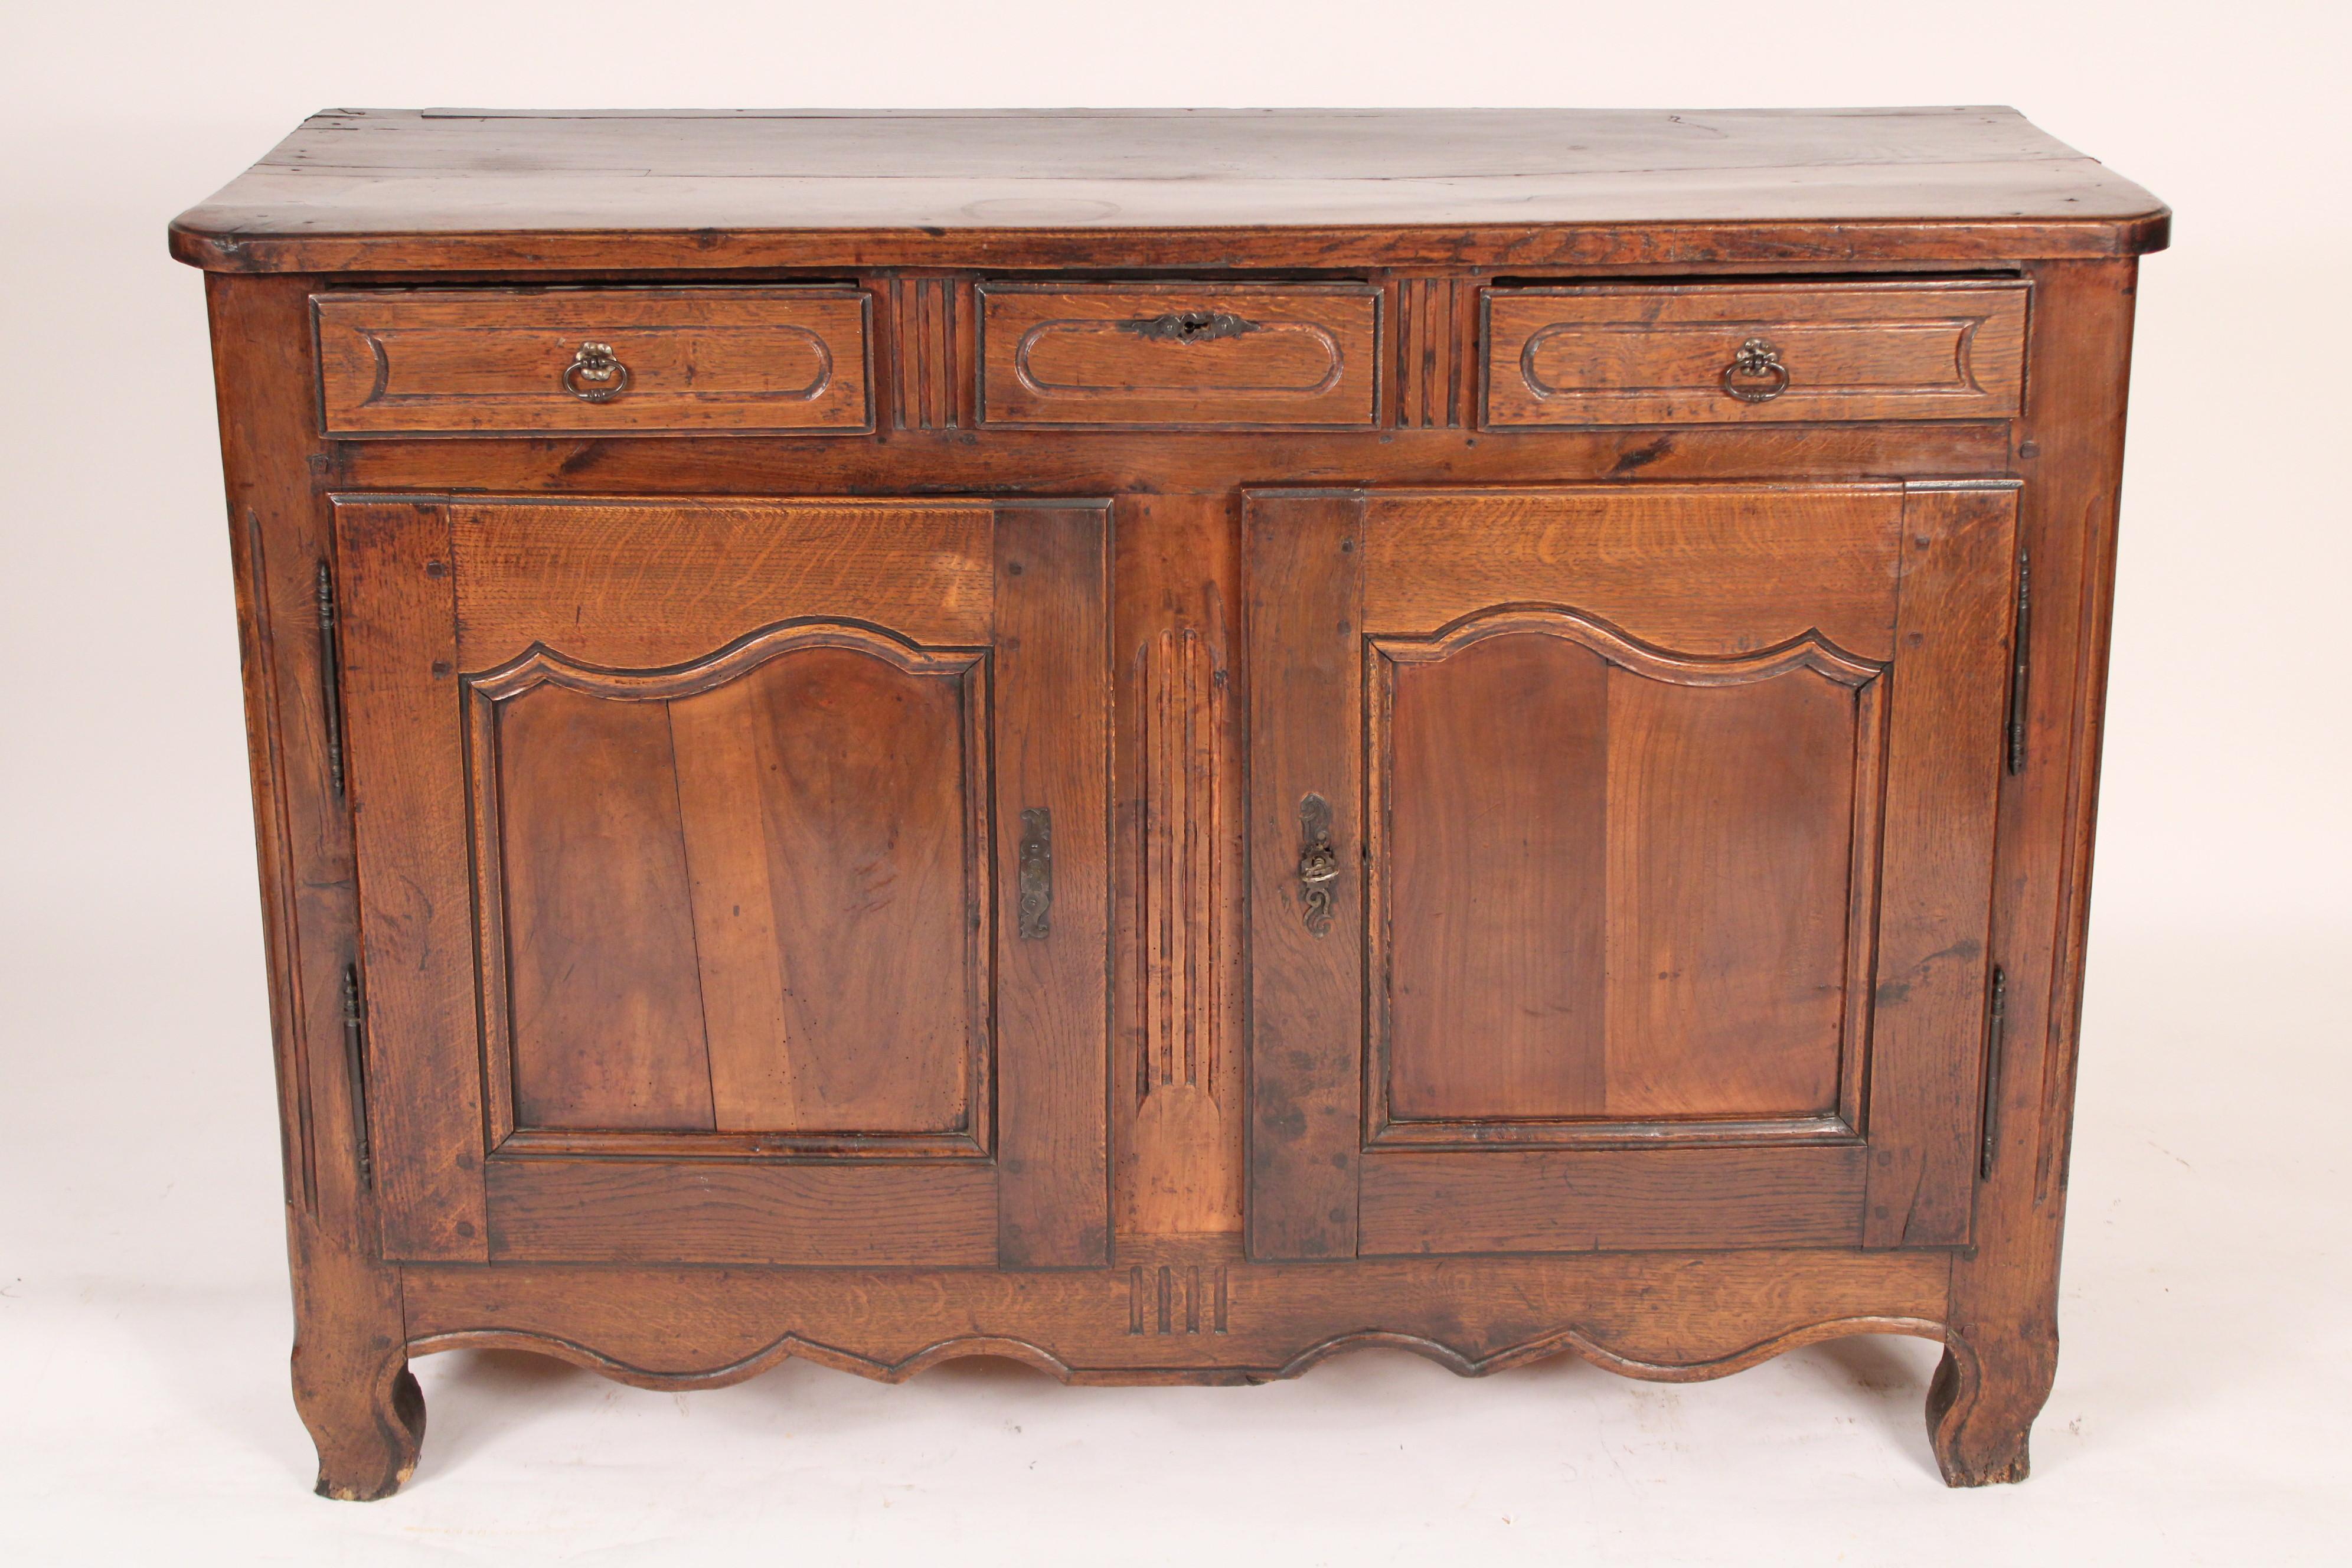 Antique Louis XV provincial style oak buffet, early 19th century. With a 3 board top with rounded corners, 3 drawers over two cupboard doors, a scalloped apron resting on slight cabriole. Nice old oak color, mortise, tenon and peg case construction